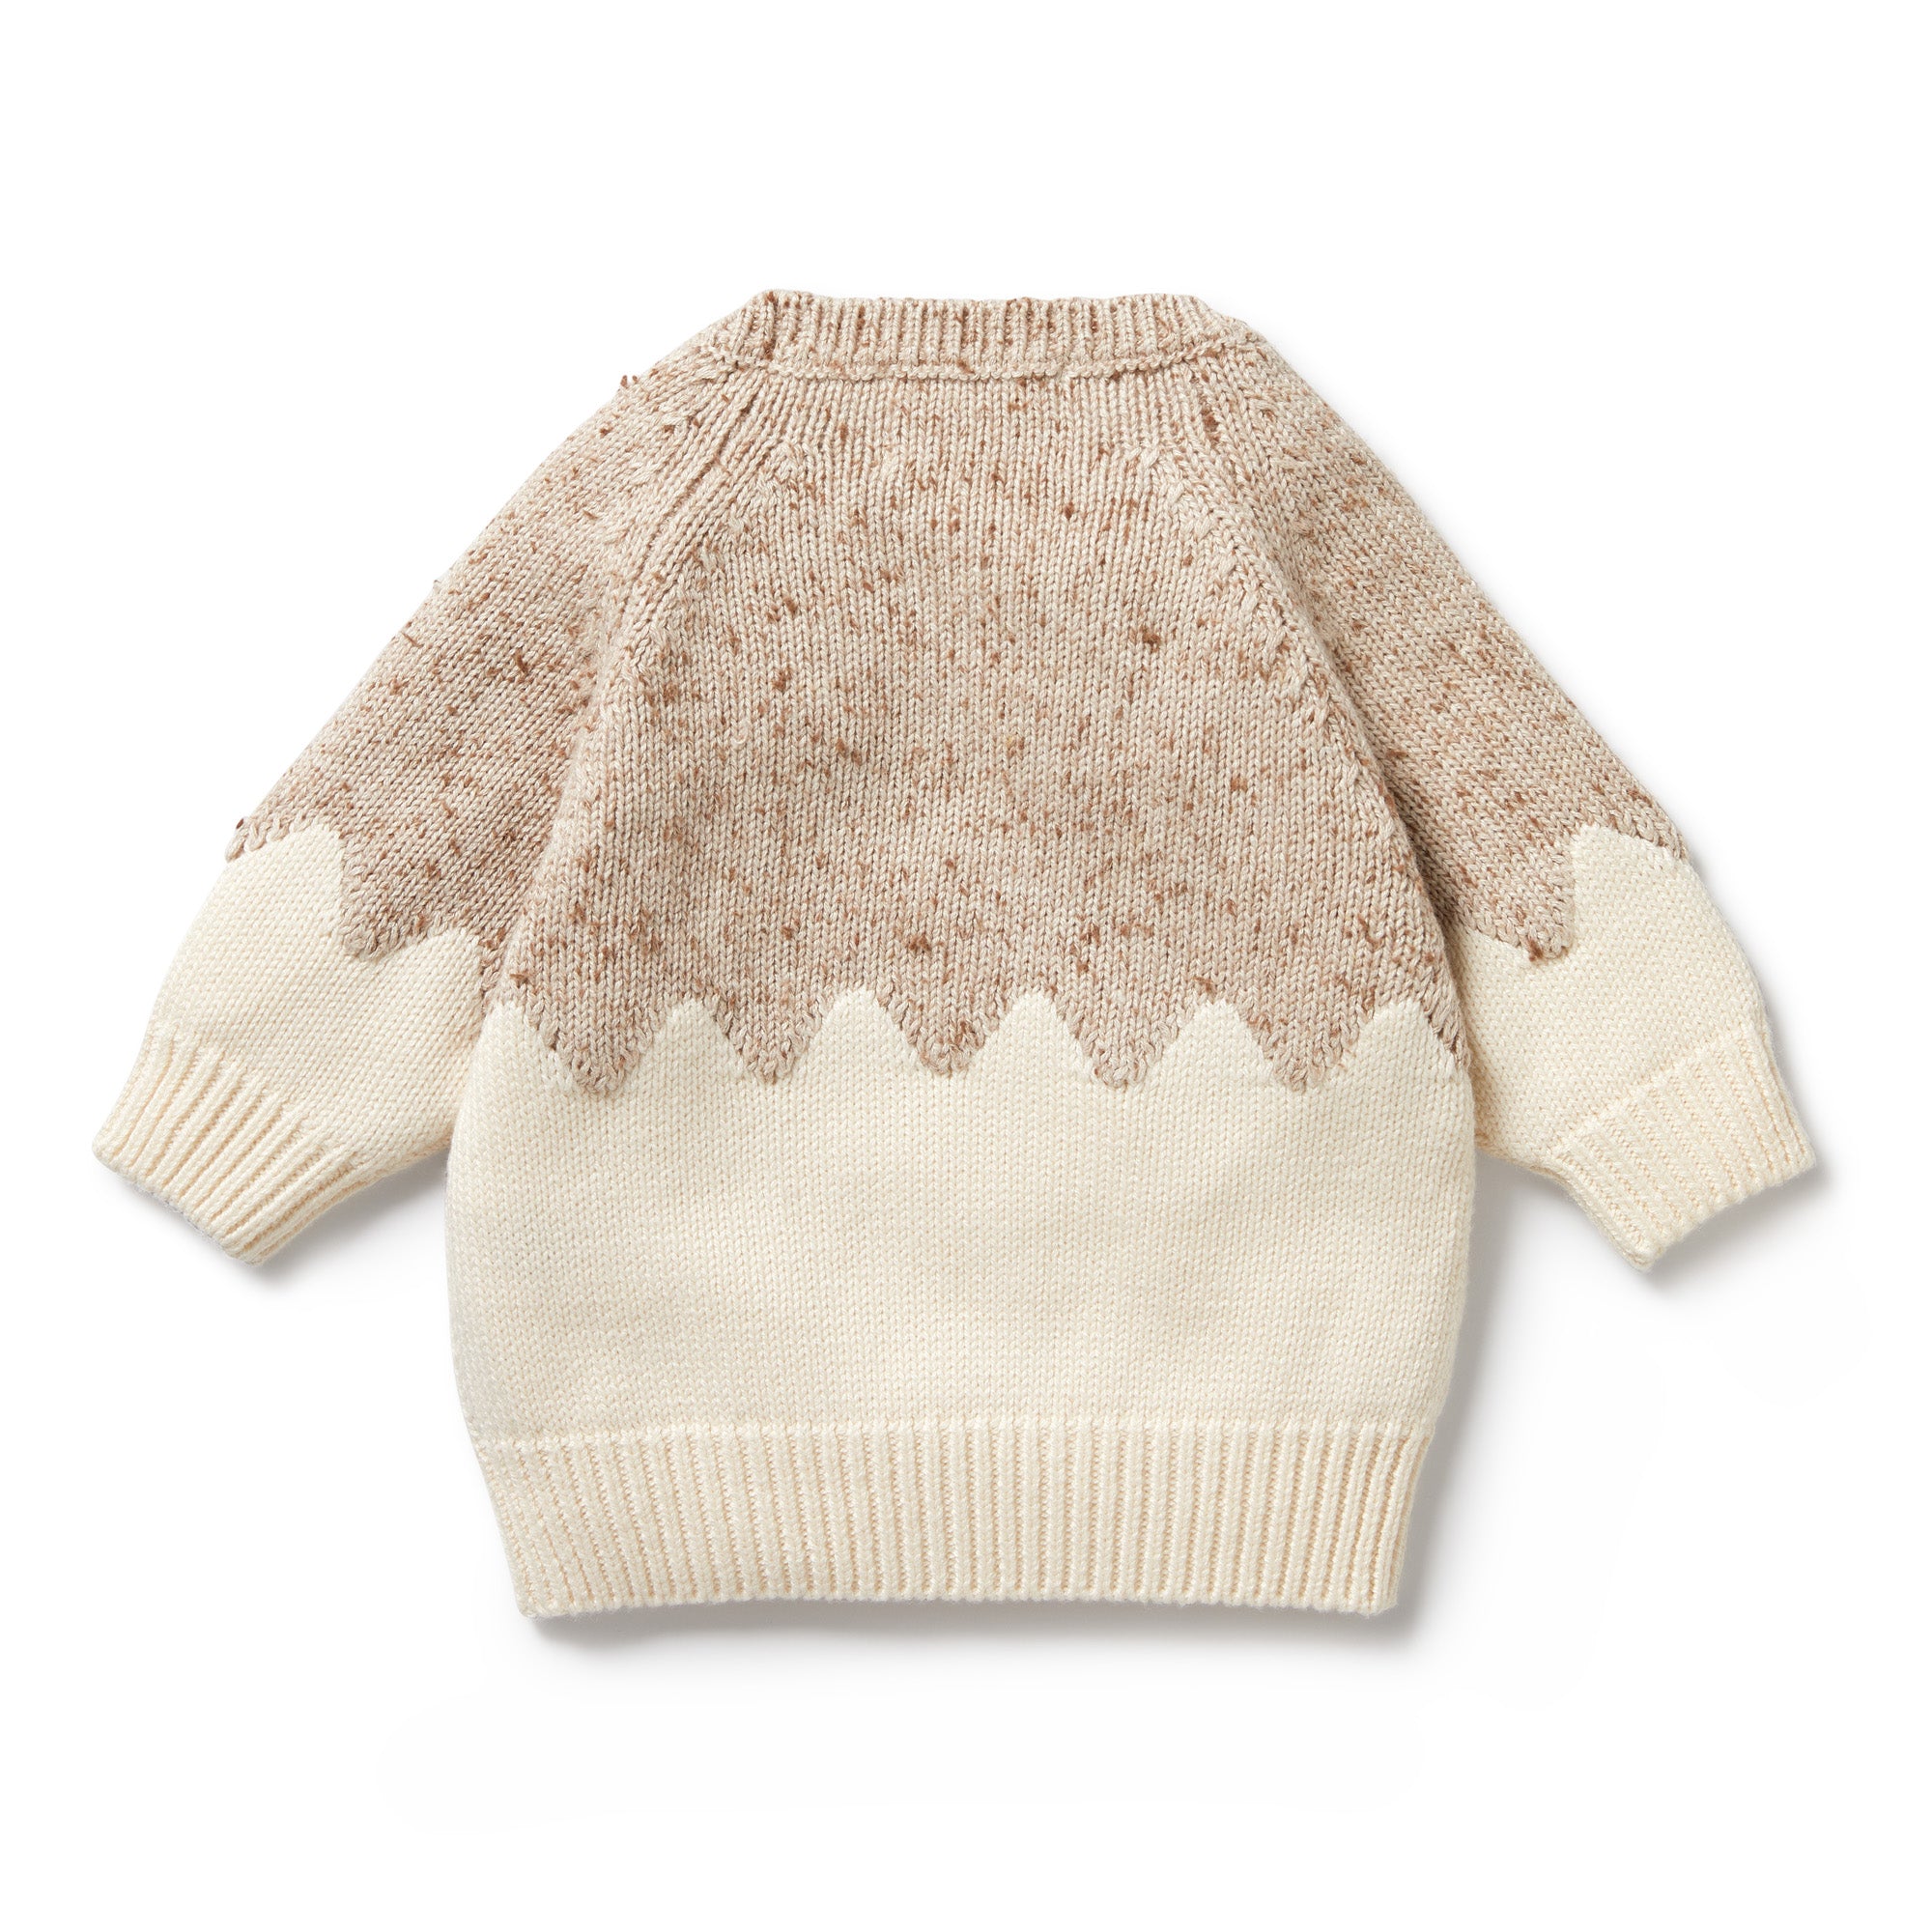 WILSON & FRENCHY - Almond Fleck Knitted Jacquard Jumper